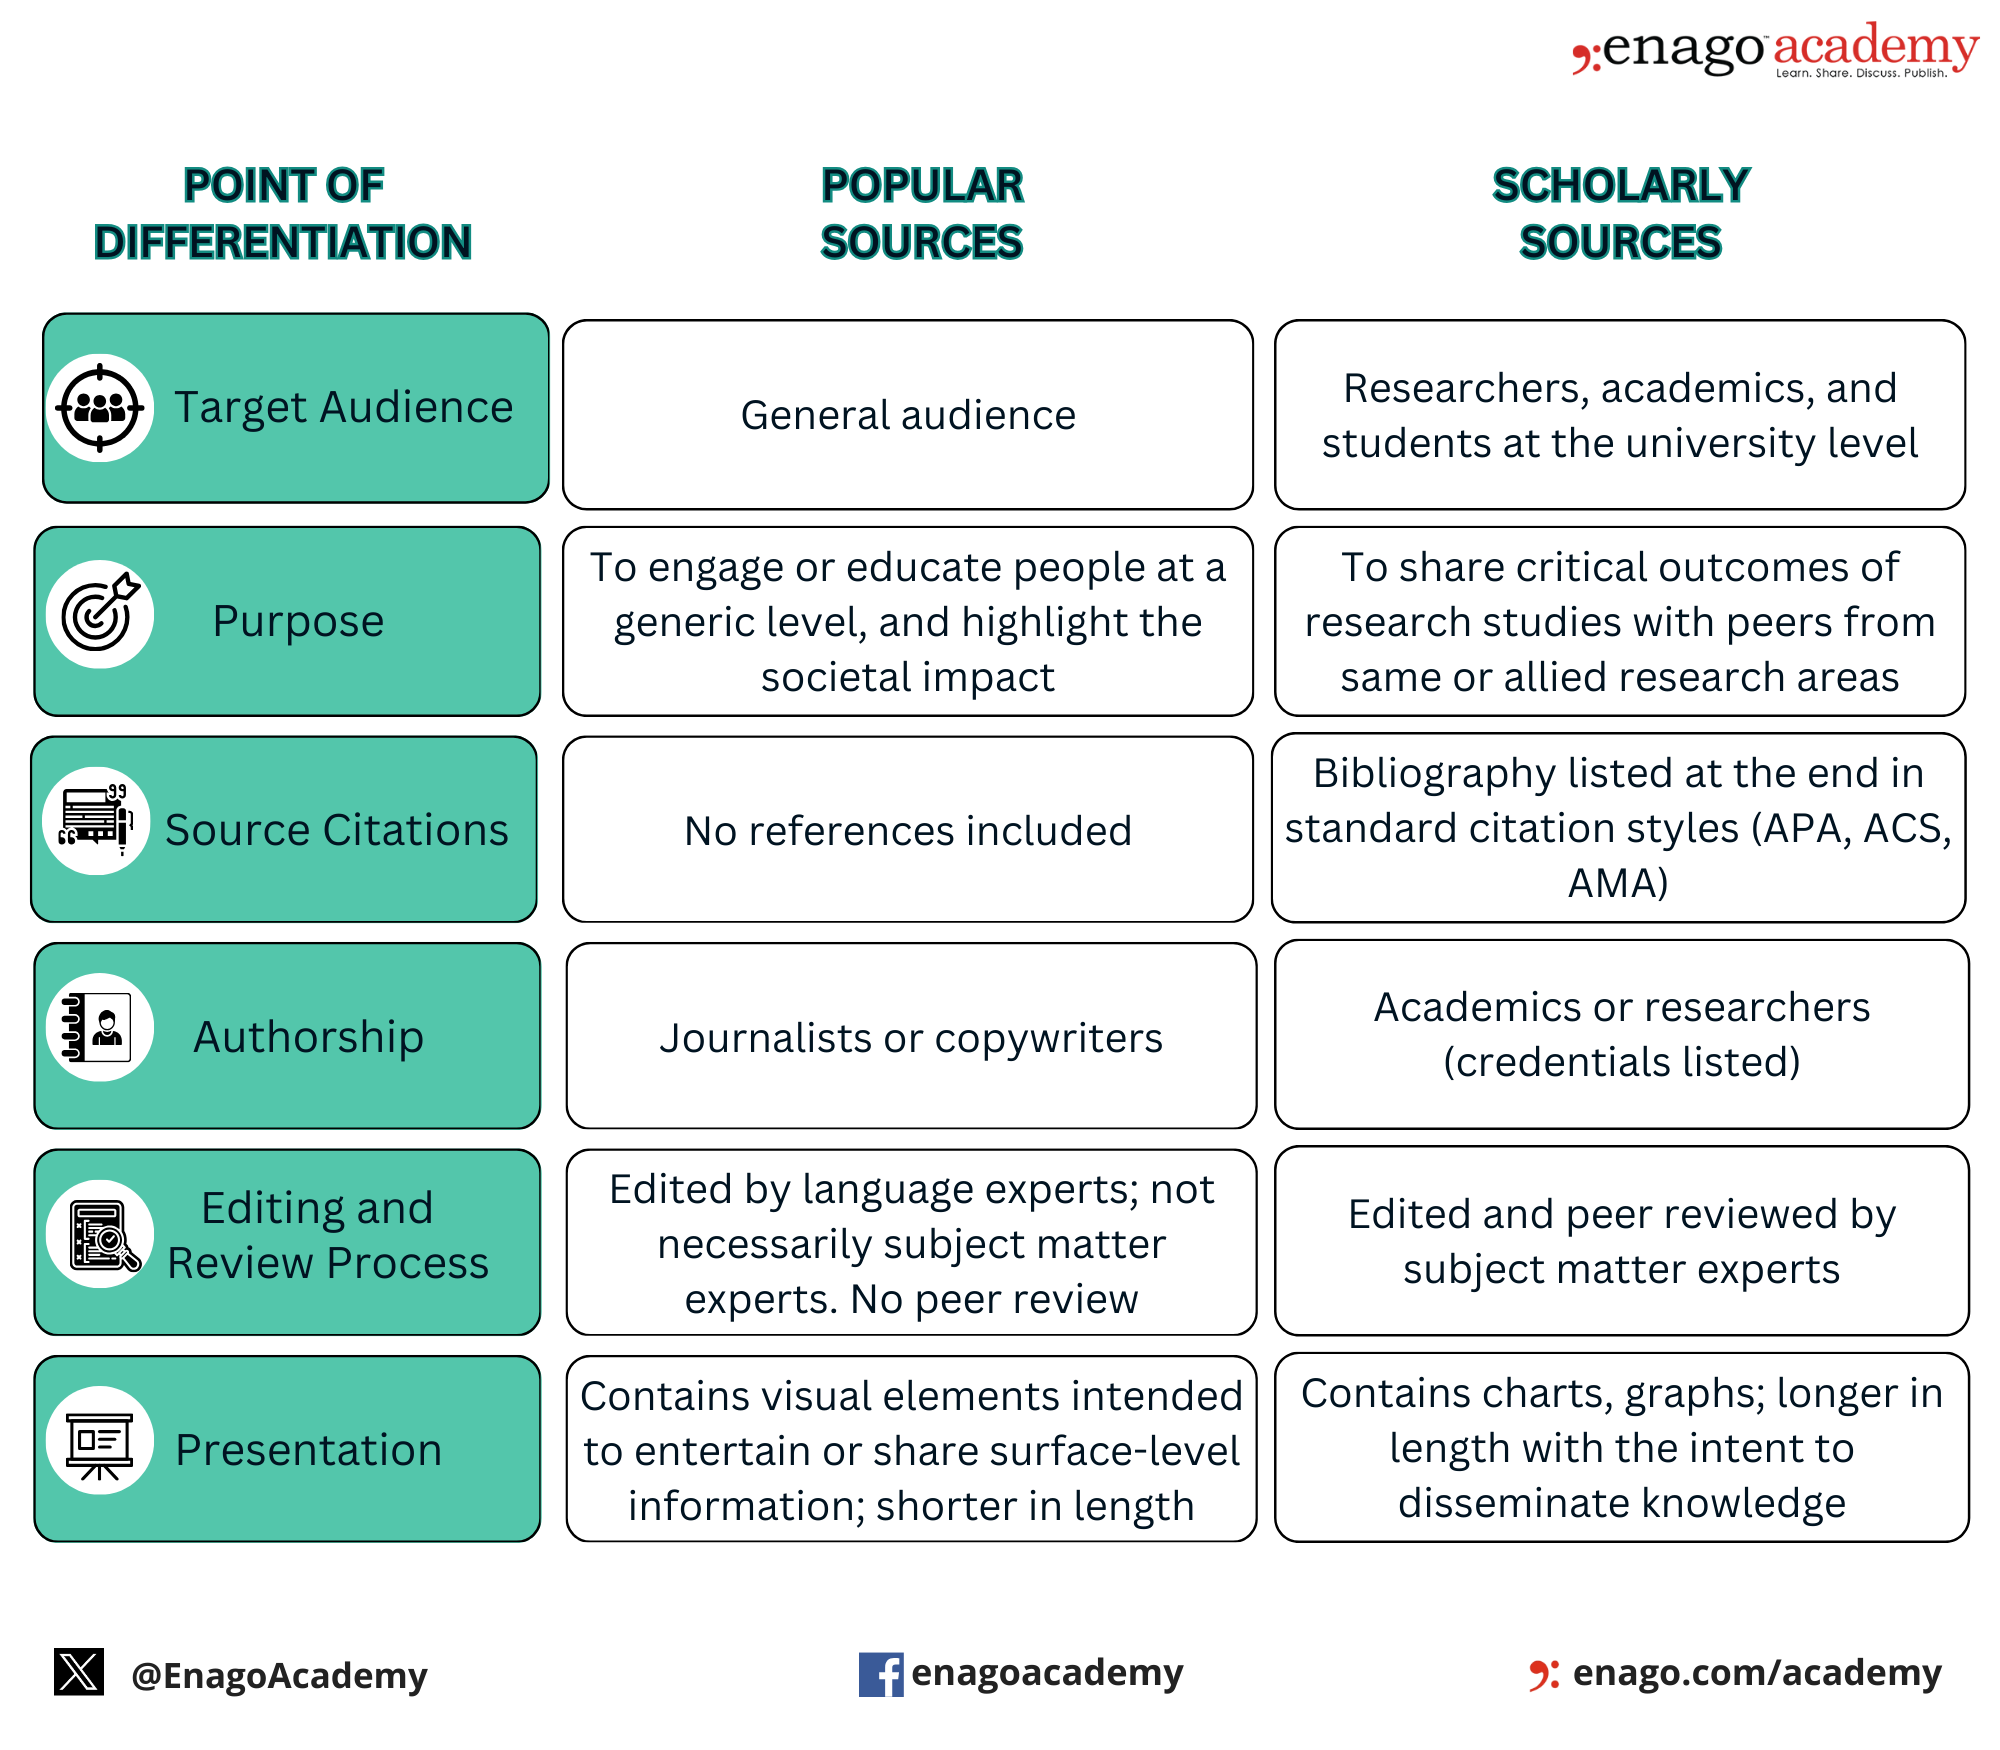 Difference between scholarly sources and popular sources